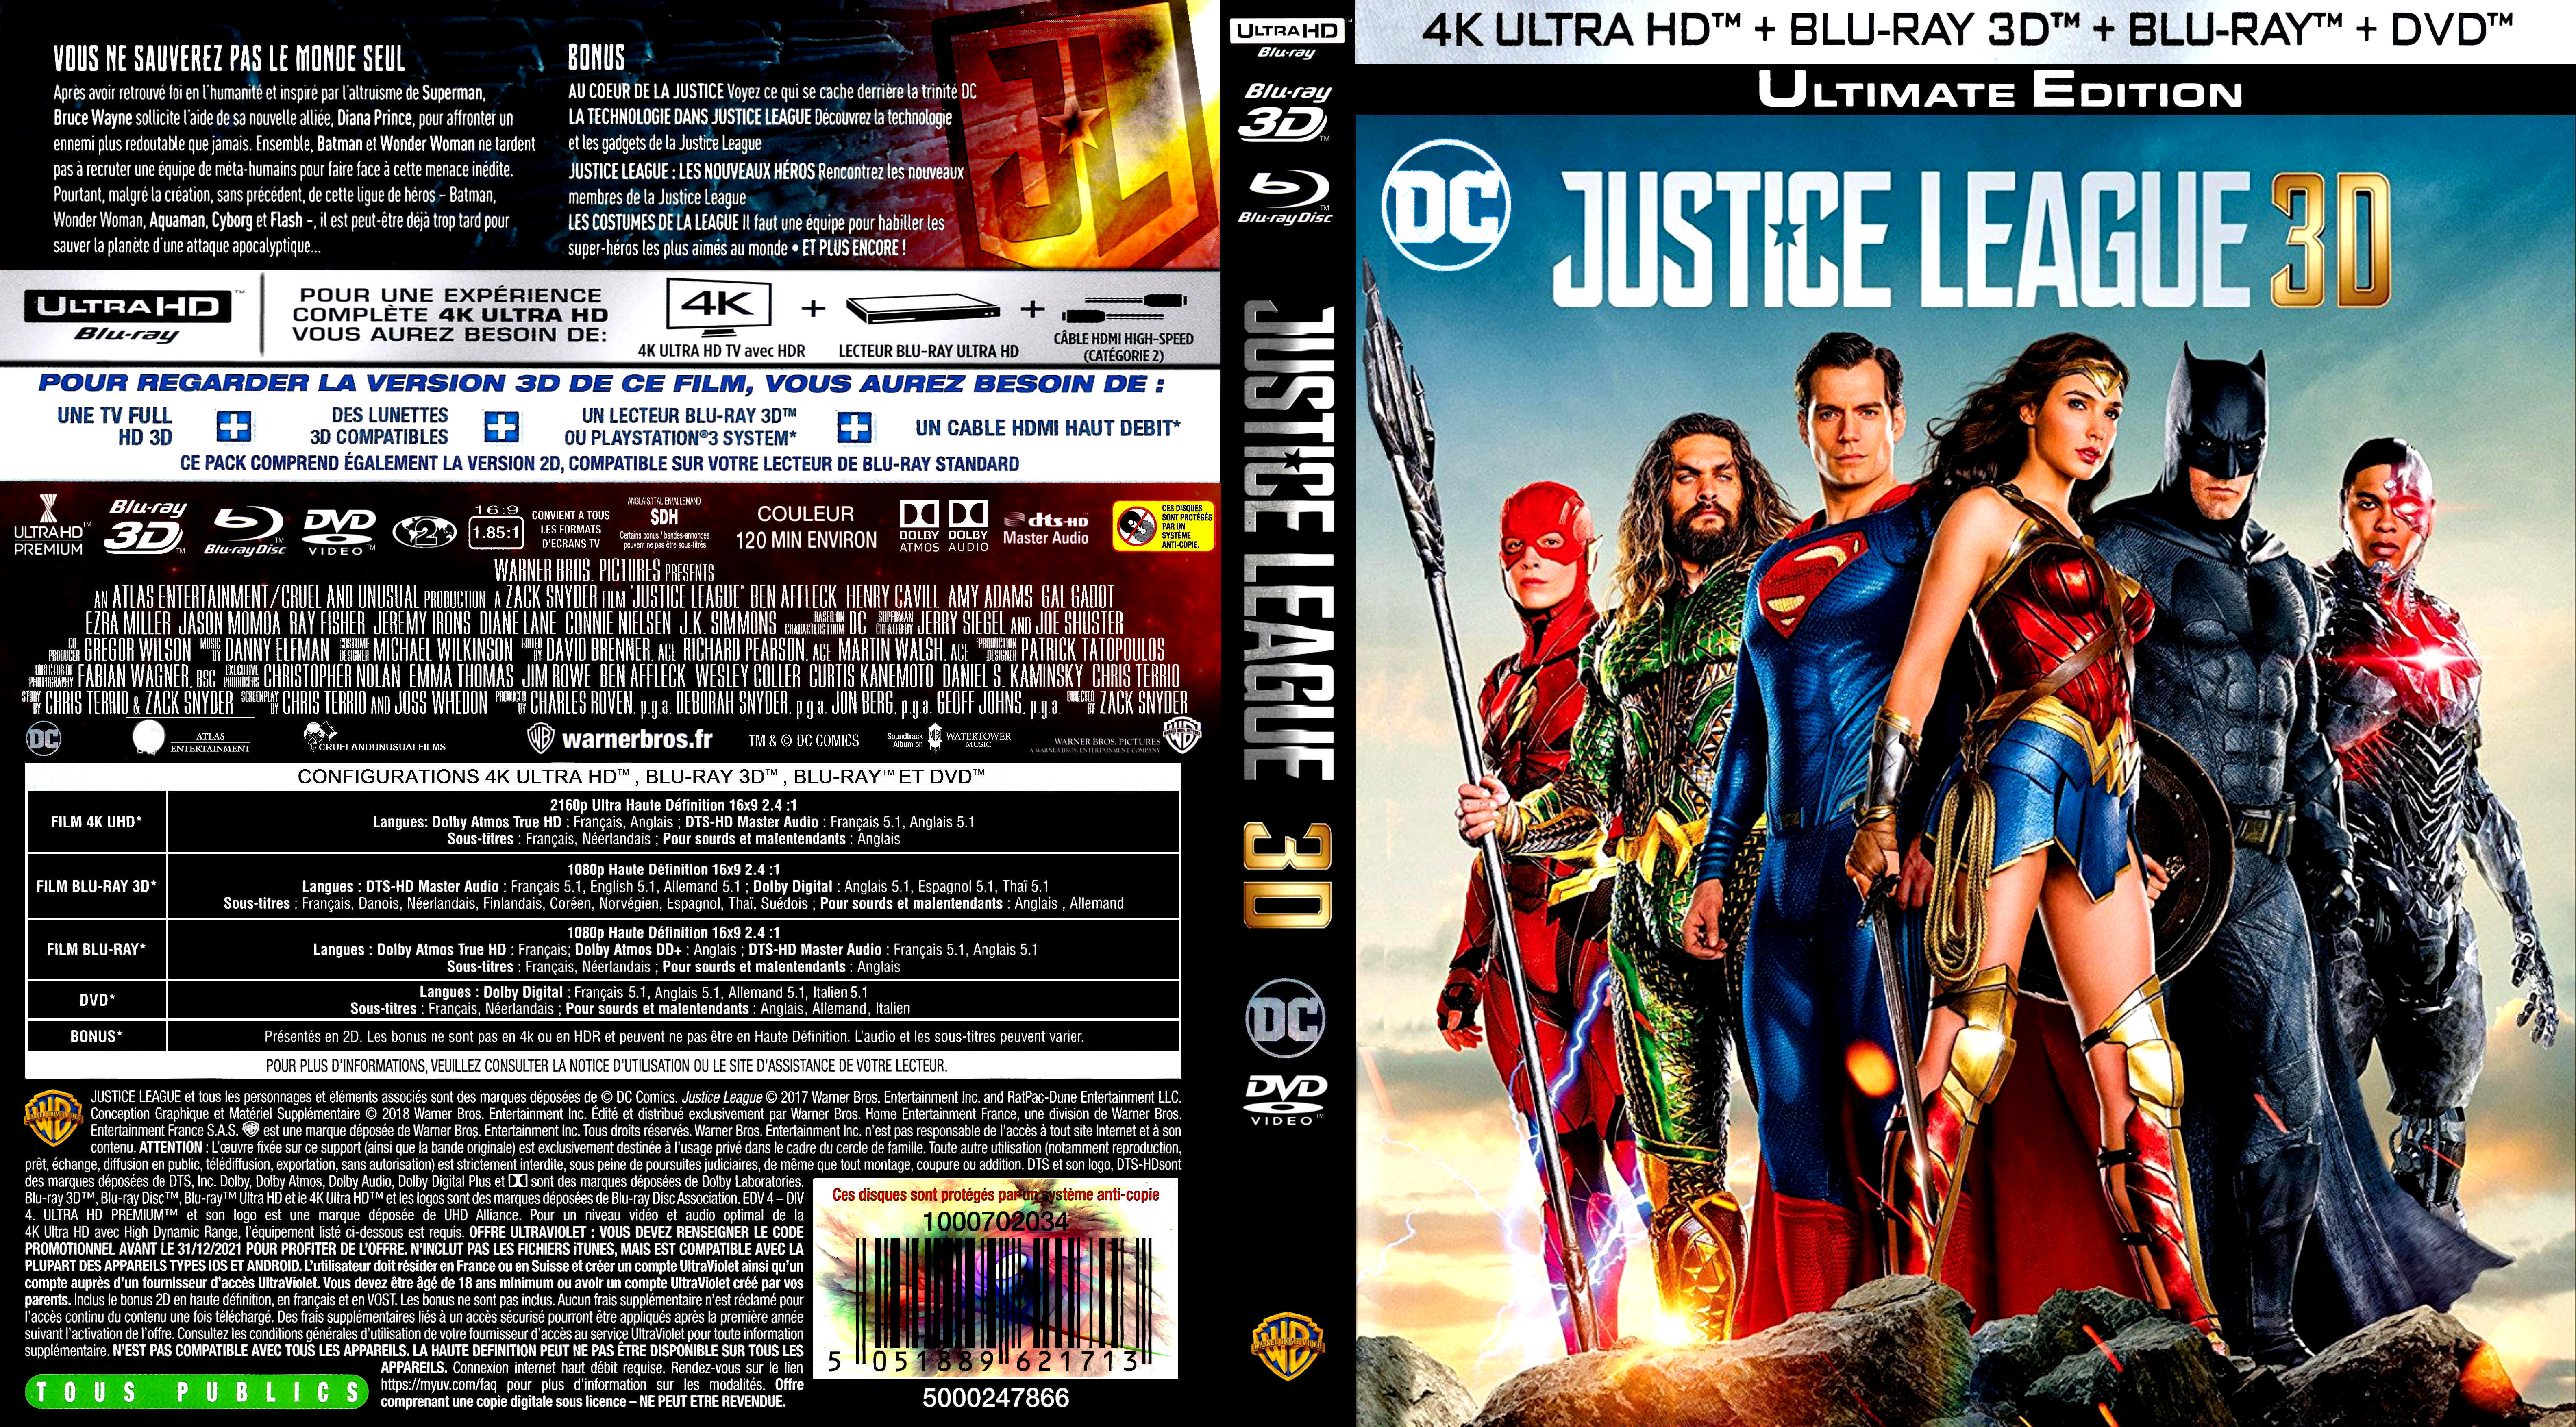 Jaquette DVD Justice League 3D (BLU-RAY)